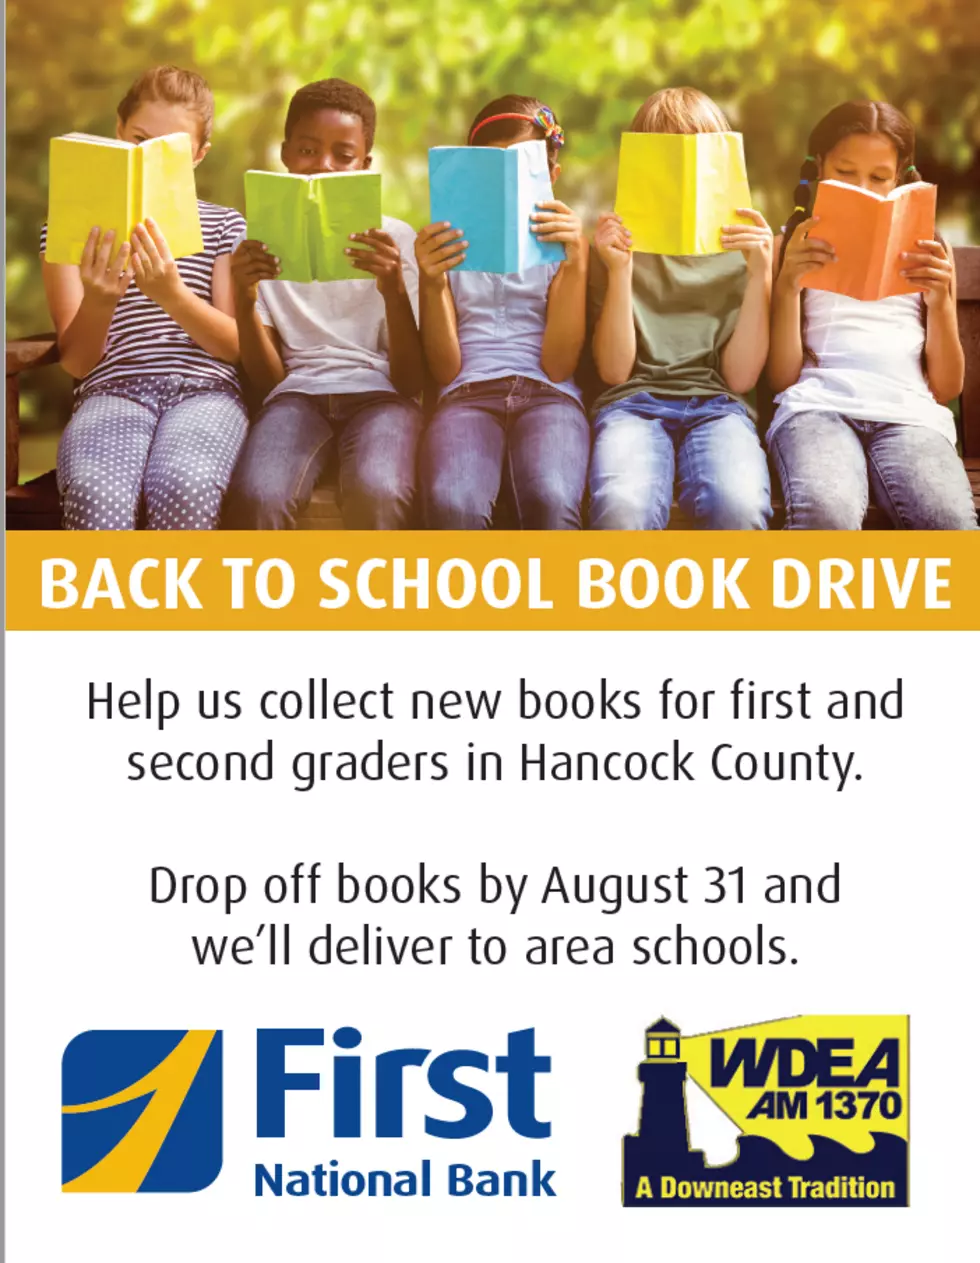 WDEA and First National Bank Team Up For Book Drive for 1st and 2nd Graders